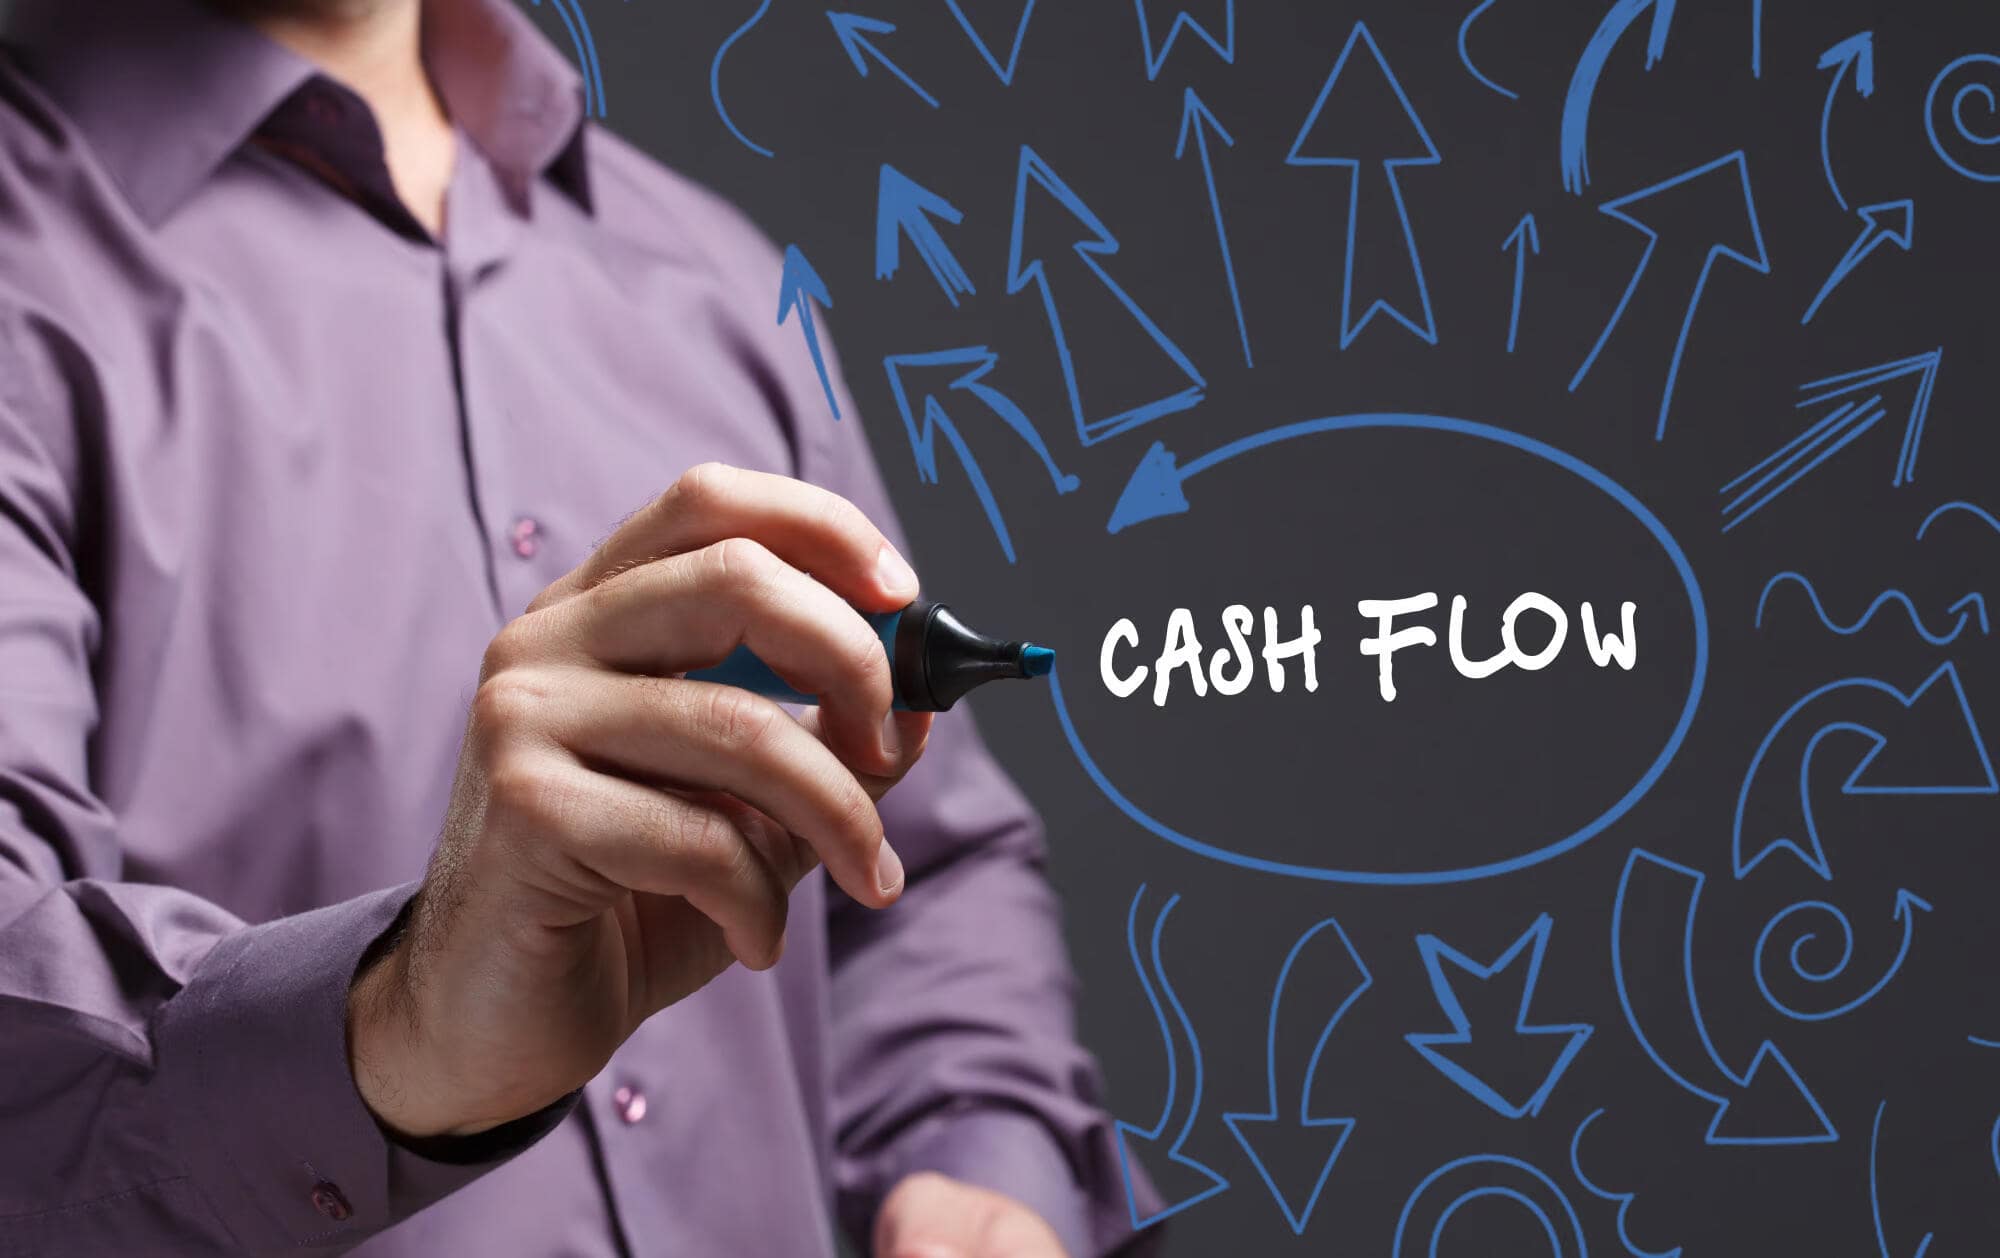 4 Ways to Increase Your Cash Flow and Get Your Life Back